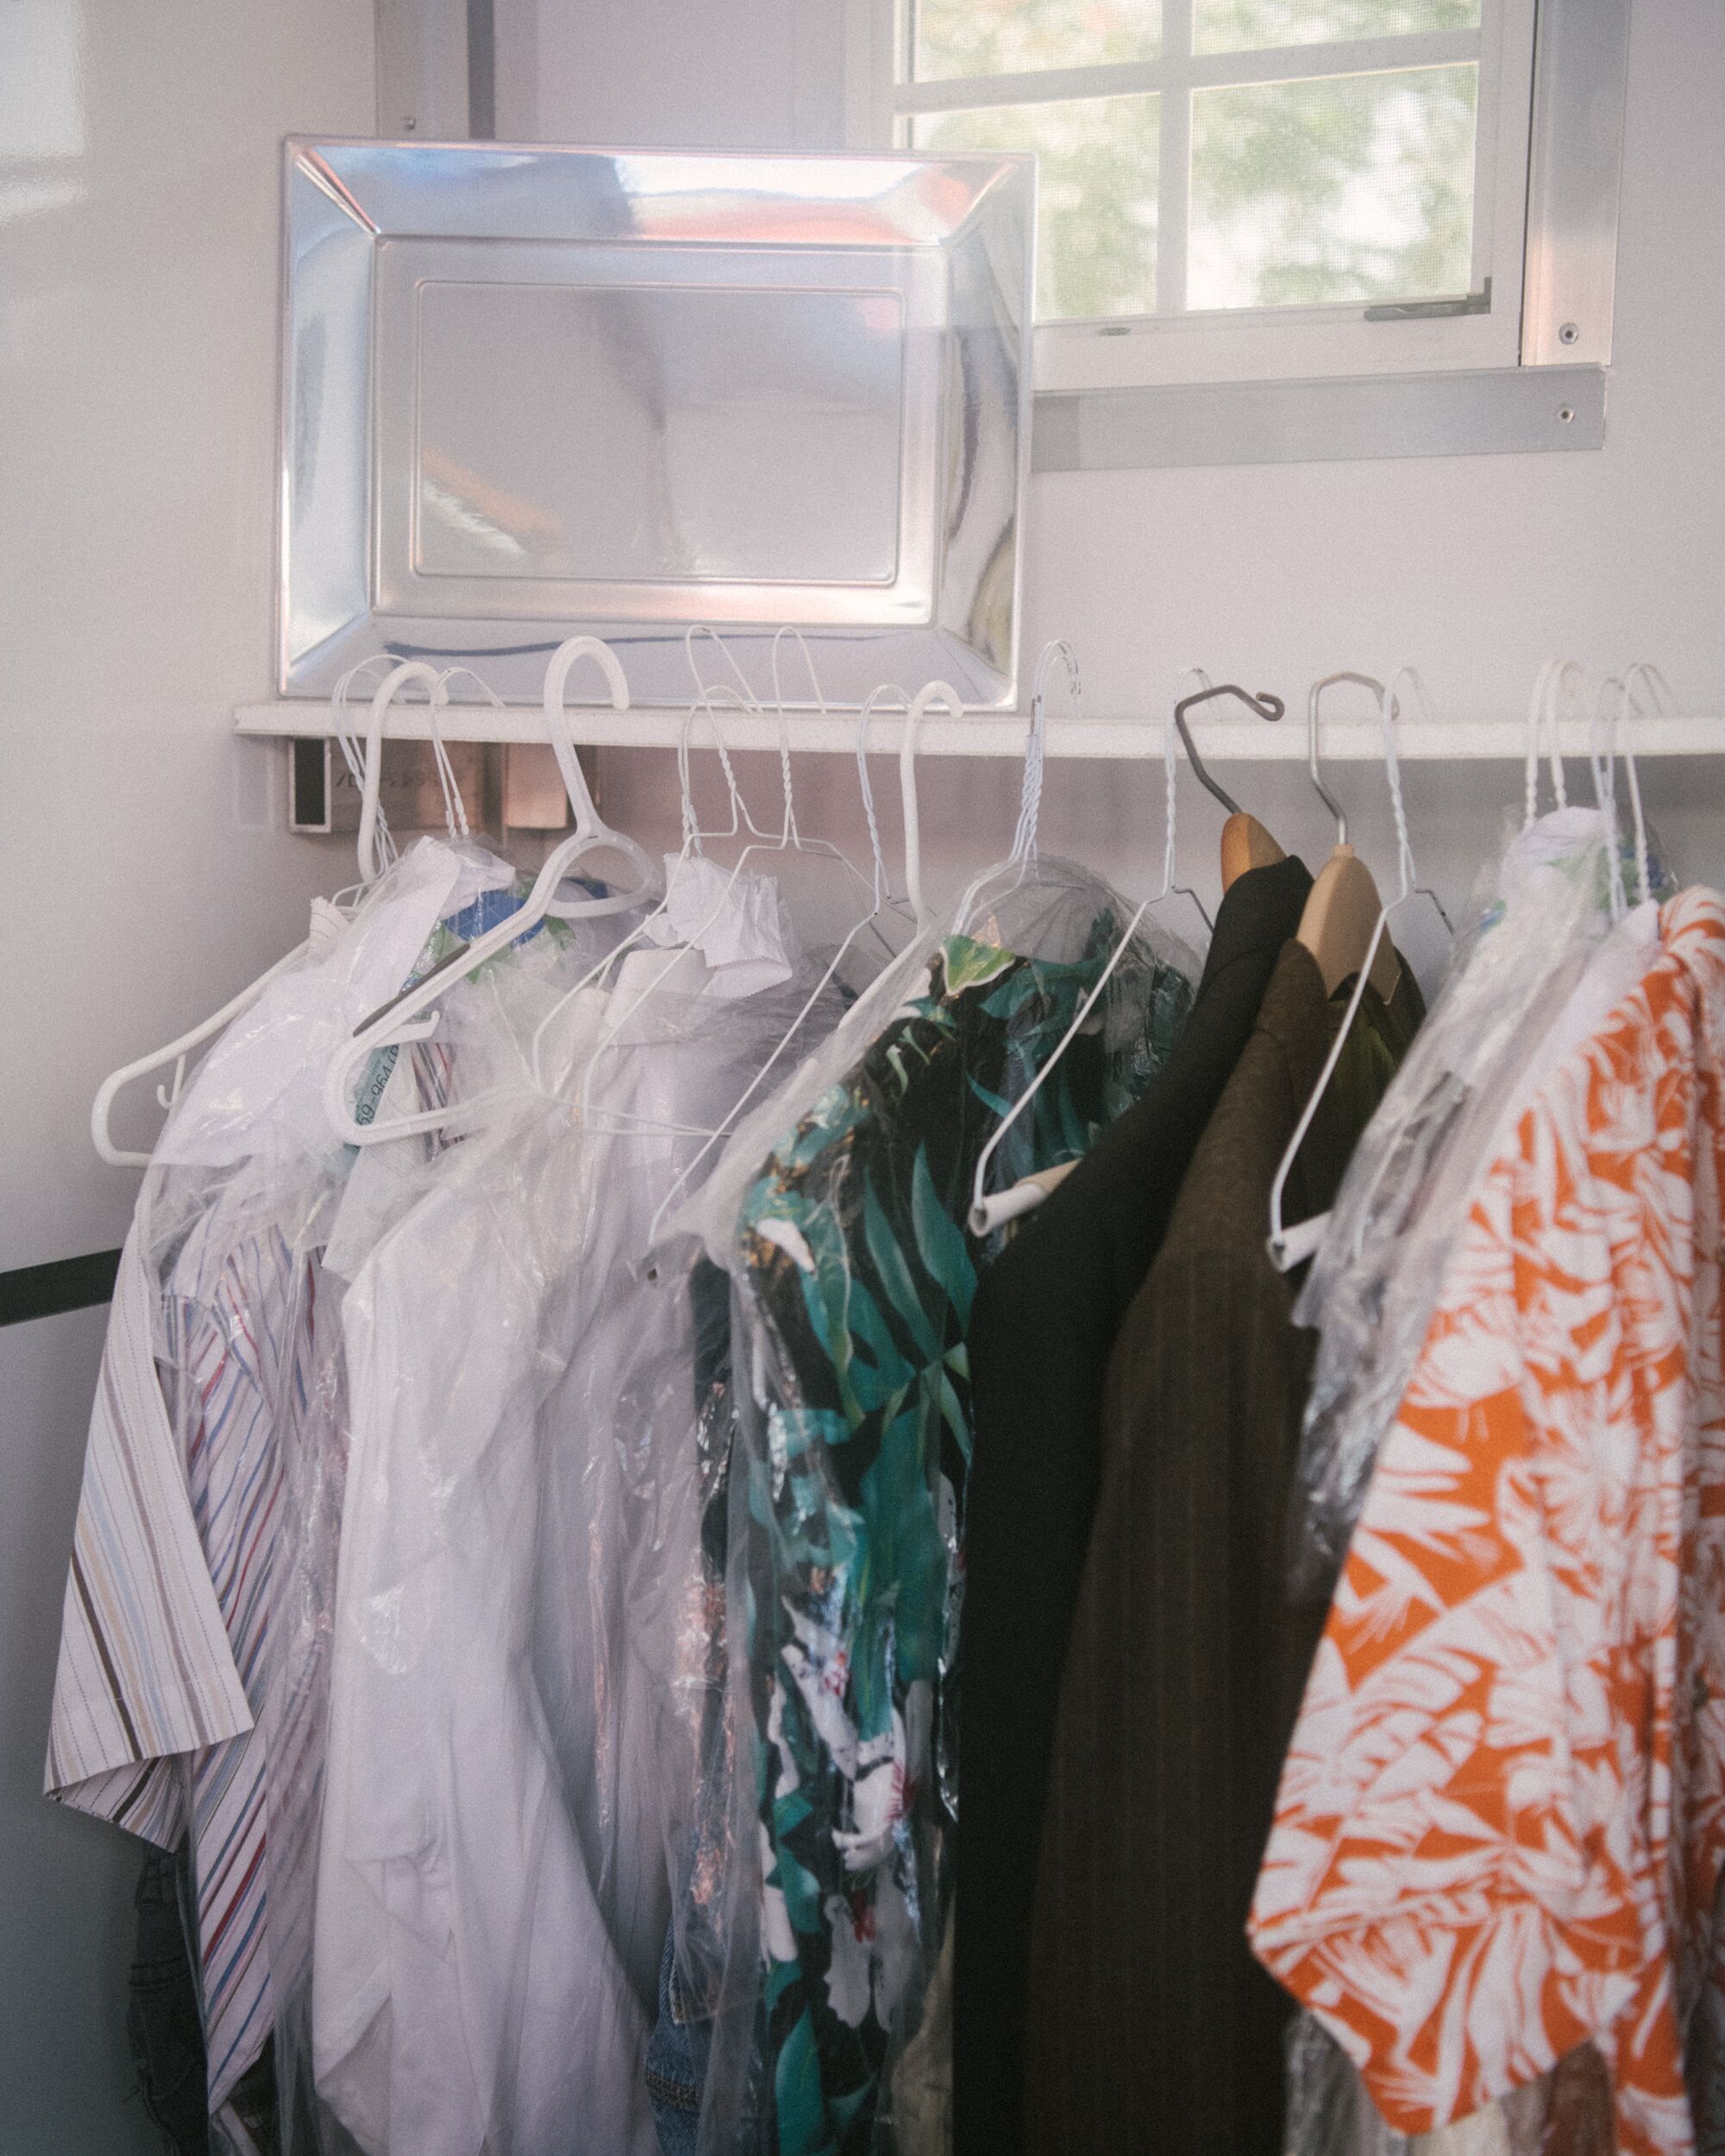 Clothes are neatly organized on hangers.